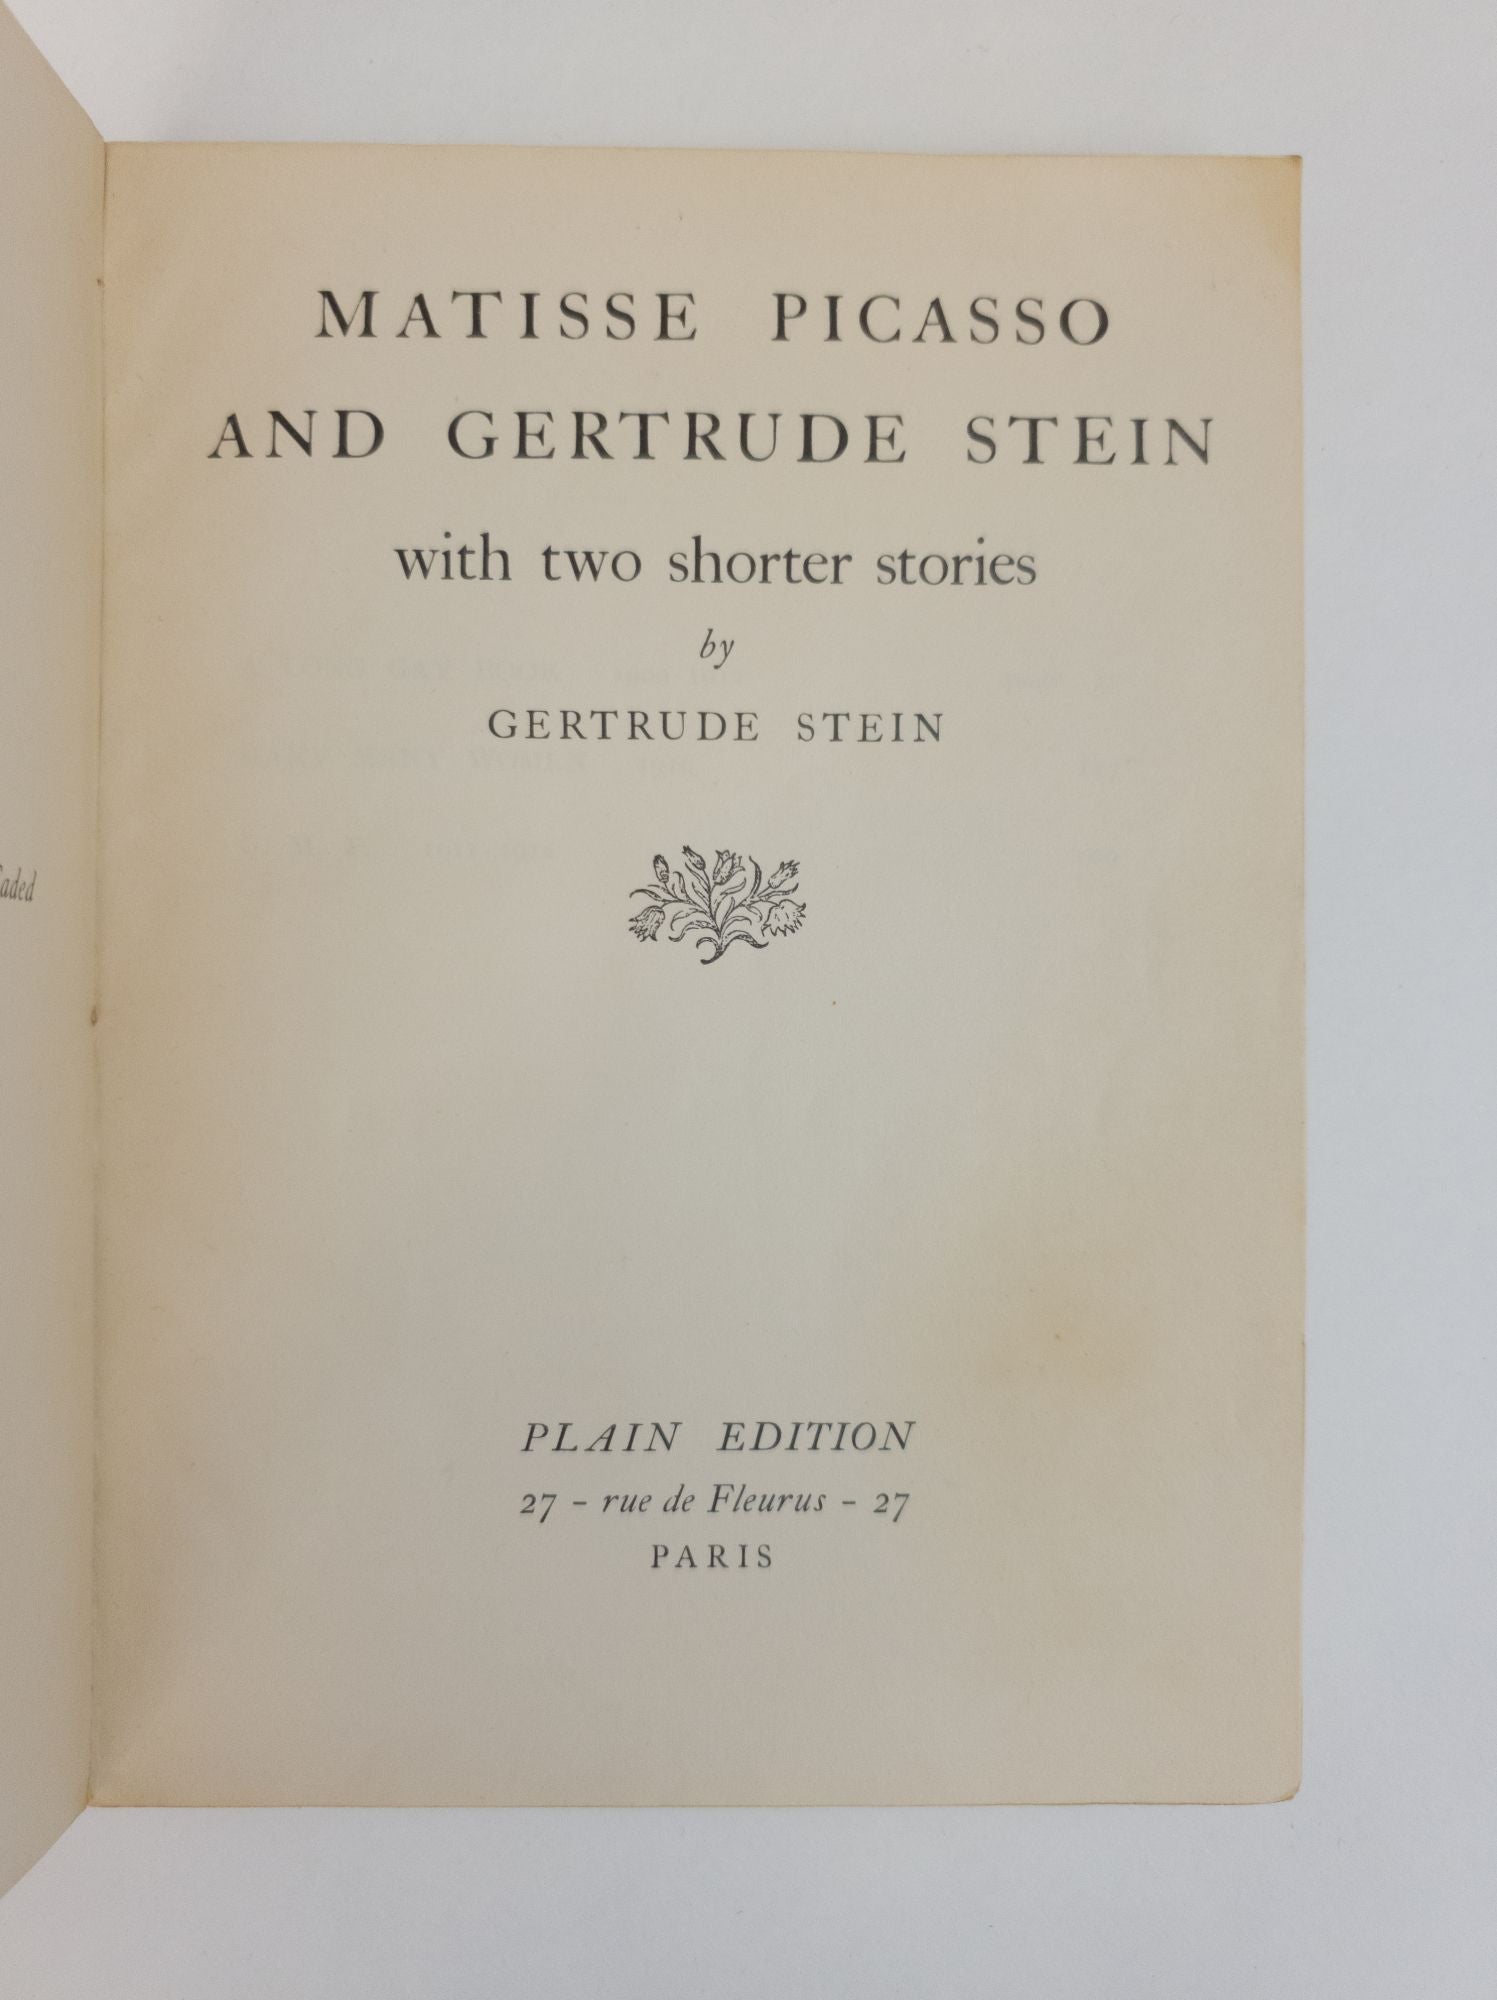 Product Image for MATISSE PICASSO AND GERTRUDE STEIN WITH TWO SHORTER STORIES